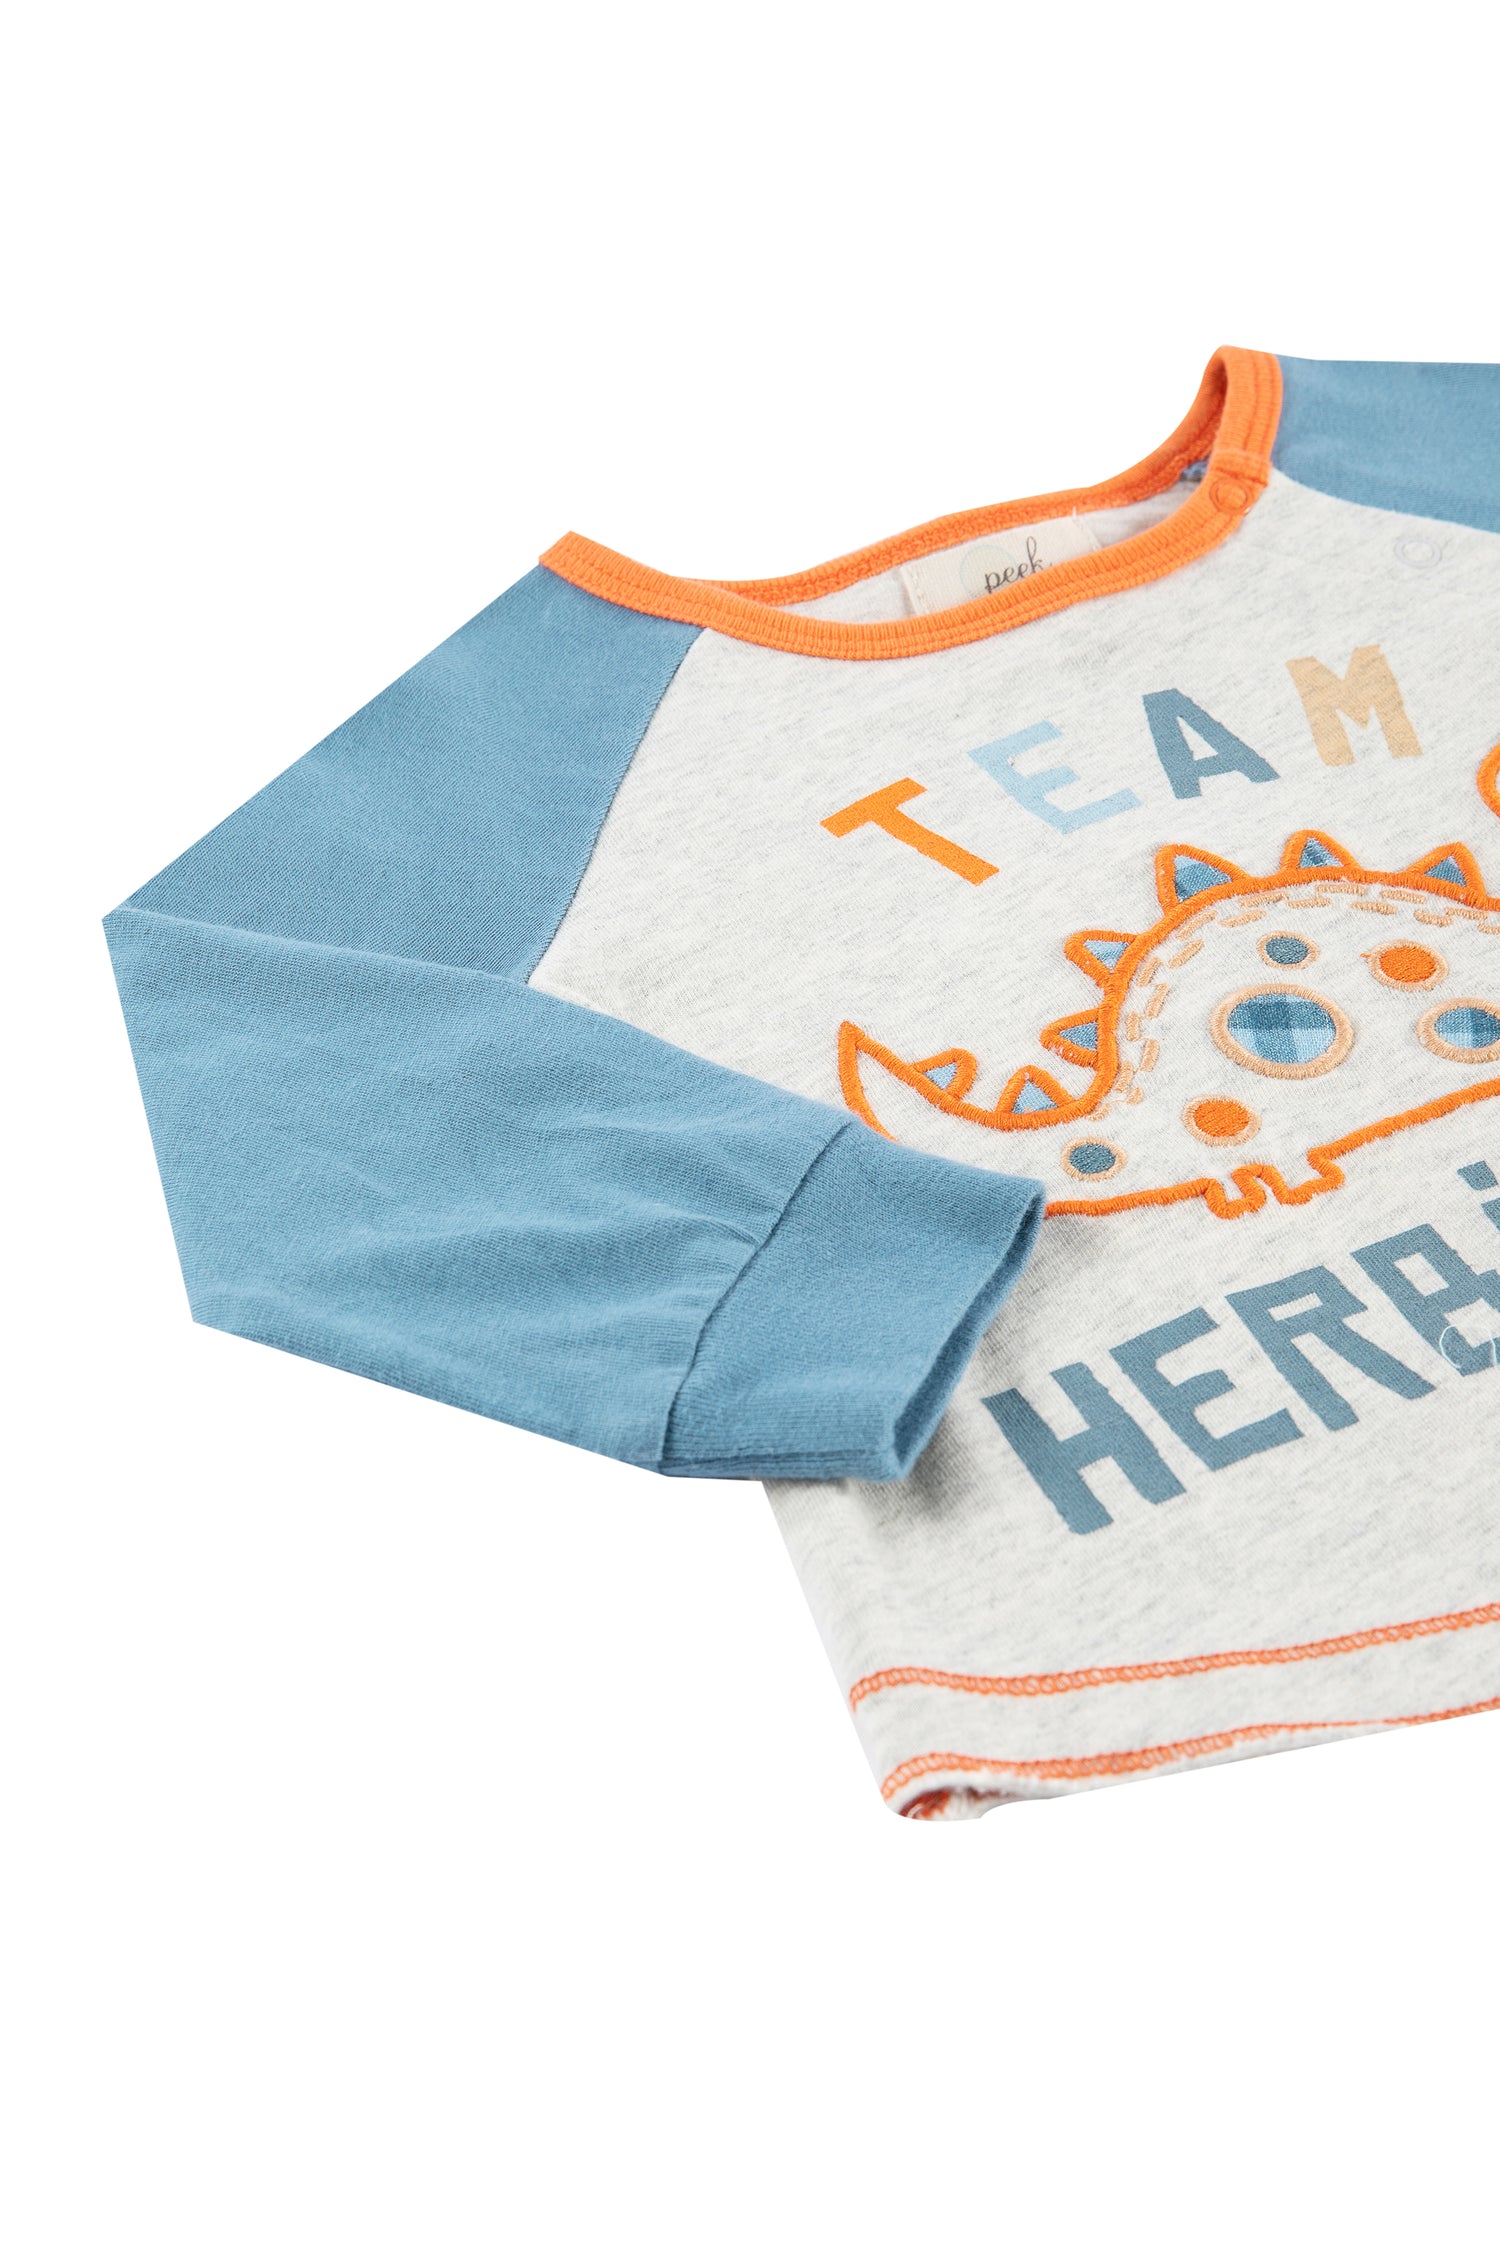 Close up side view of long sleeve top featuring an applique dinosaur and "team herbivore" verbiage